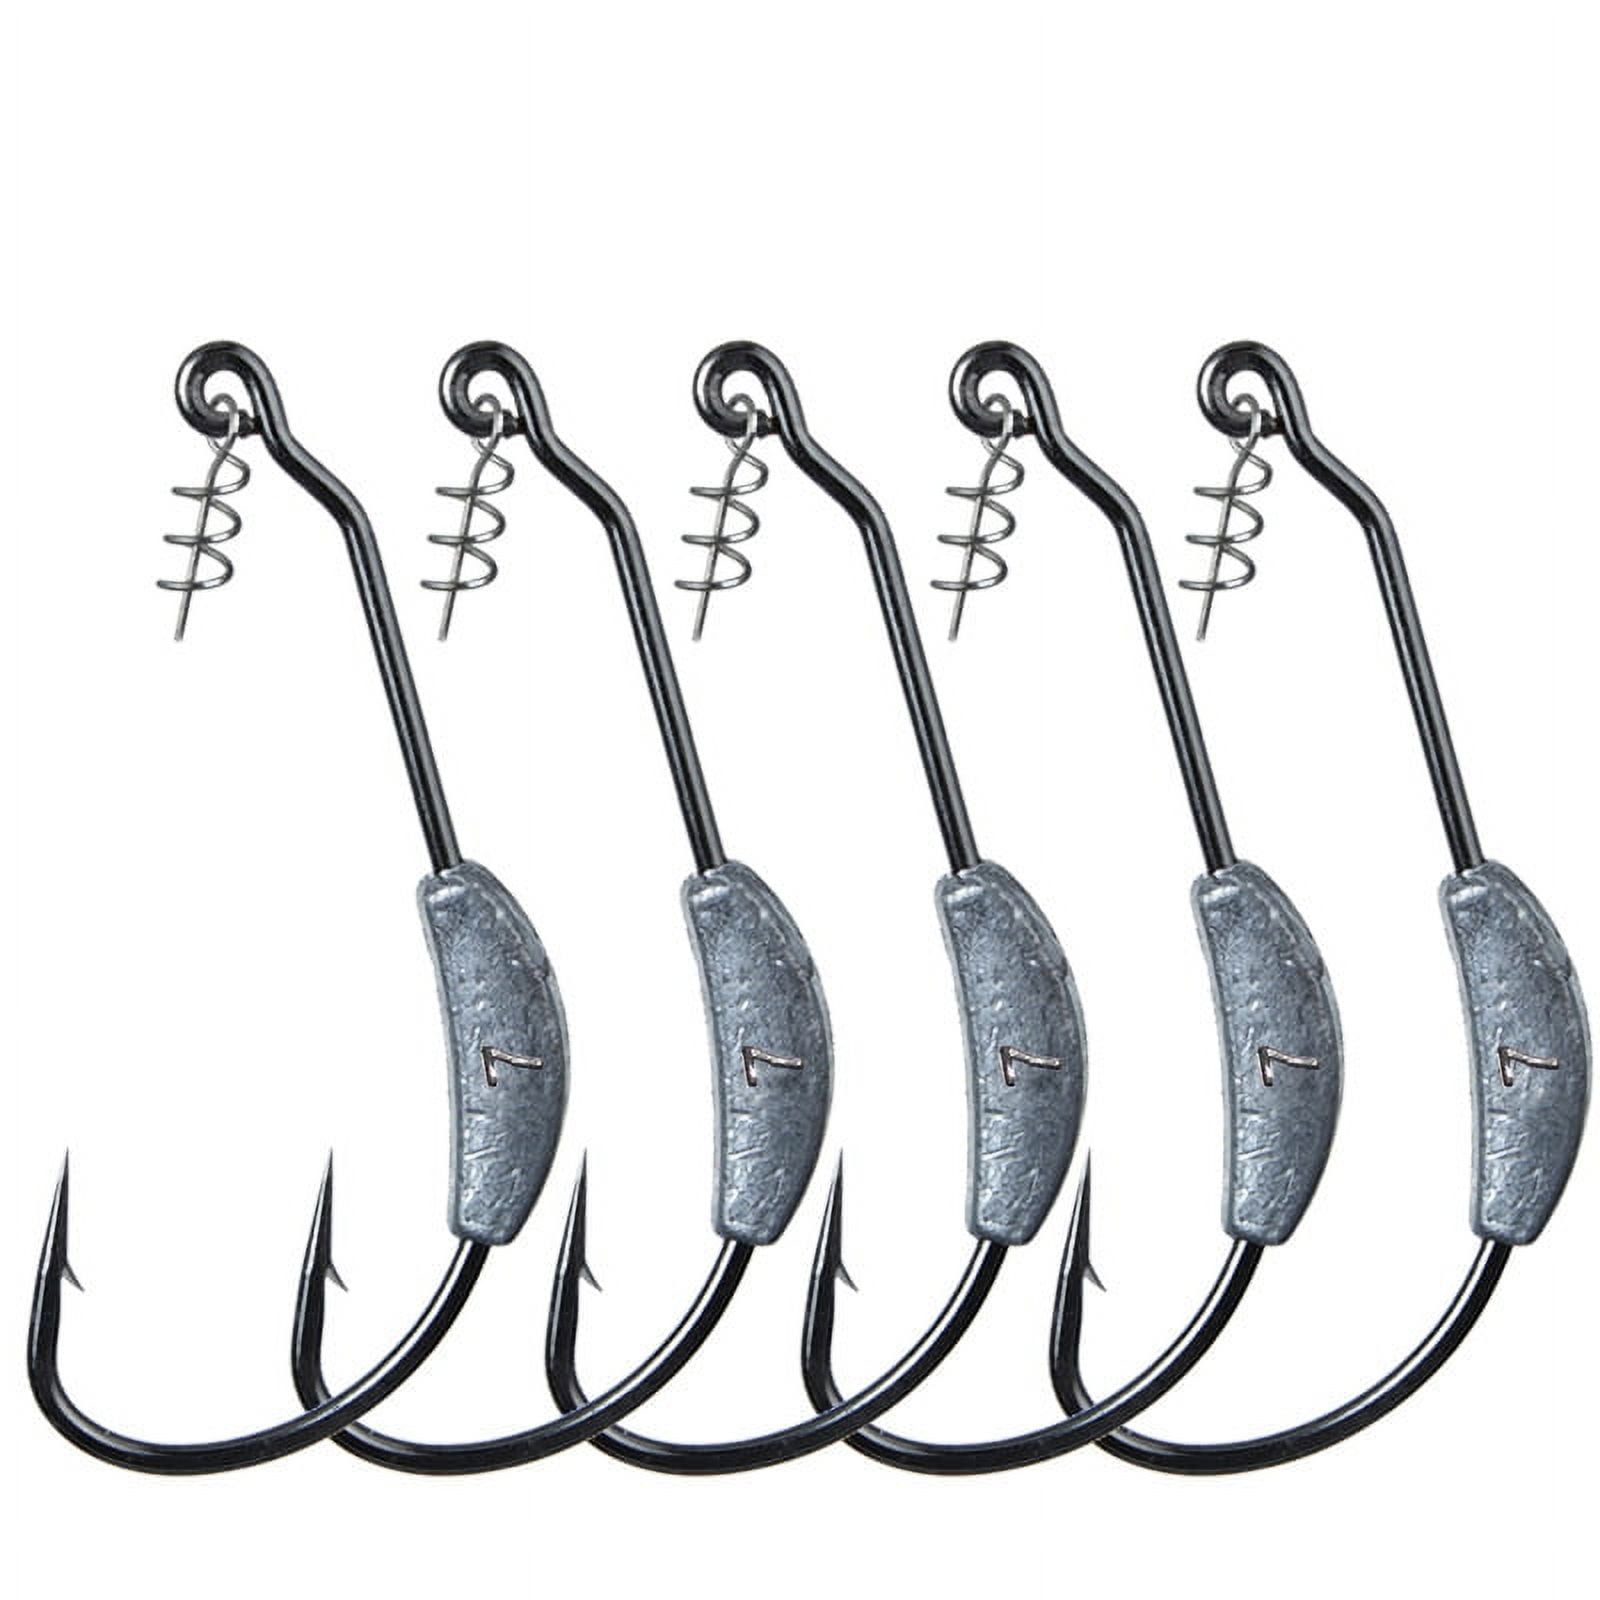 Stamens Fish Hook,5 Pcs Weighted Fishing Hooks Barbed Jig